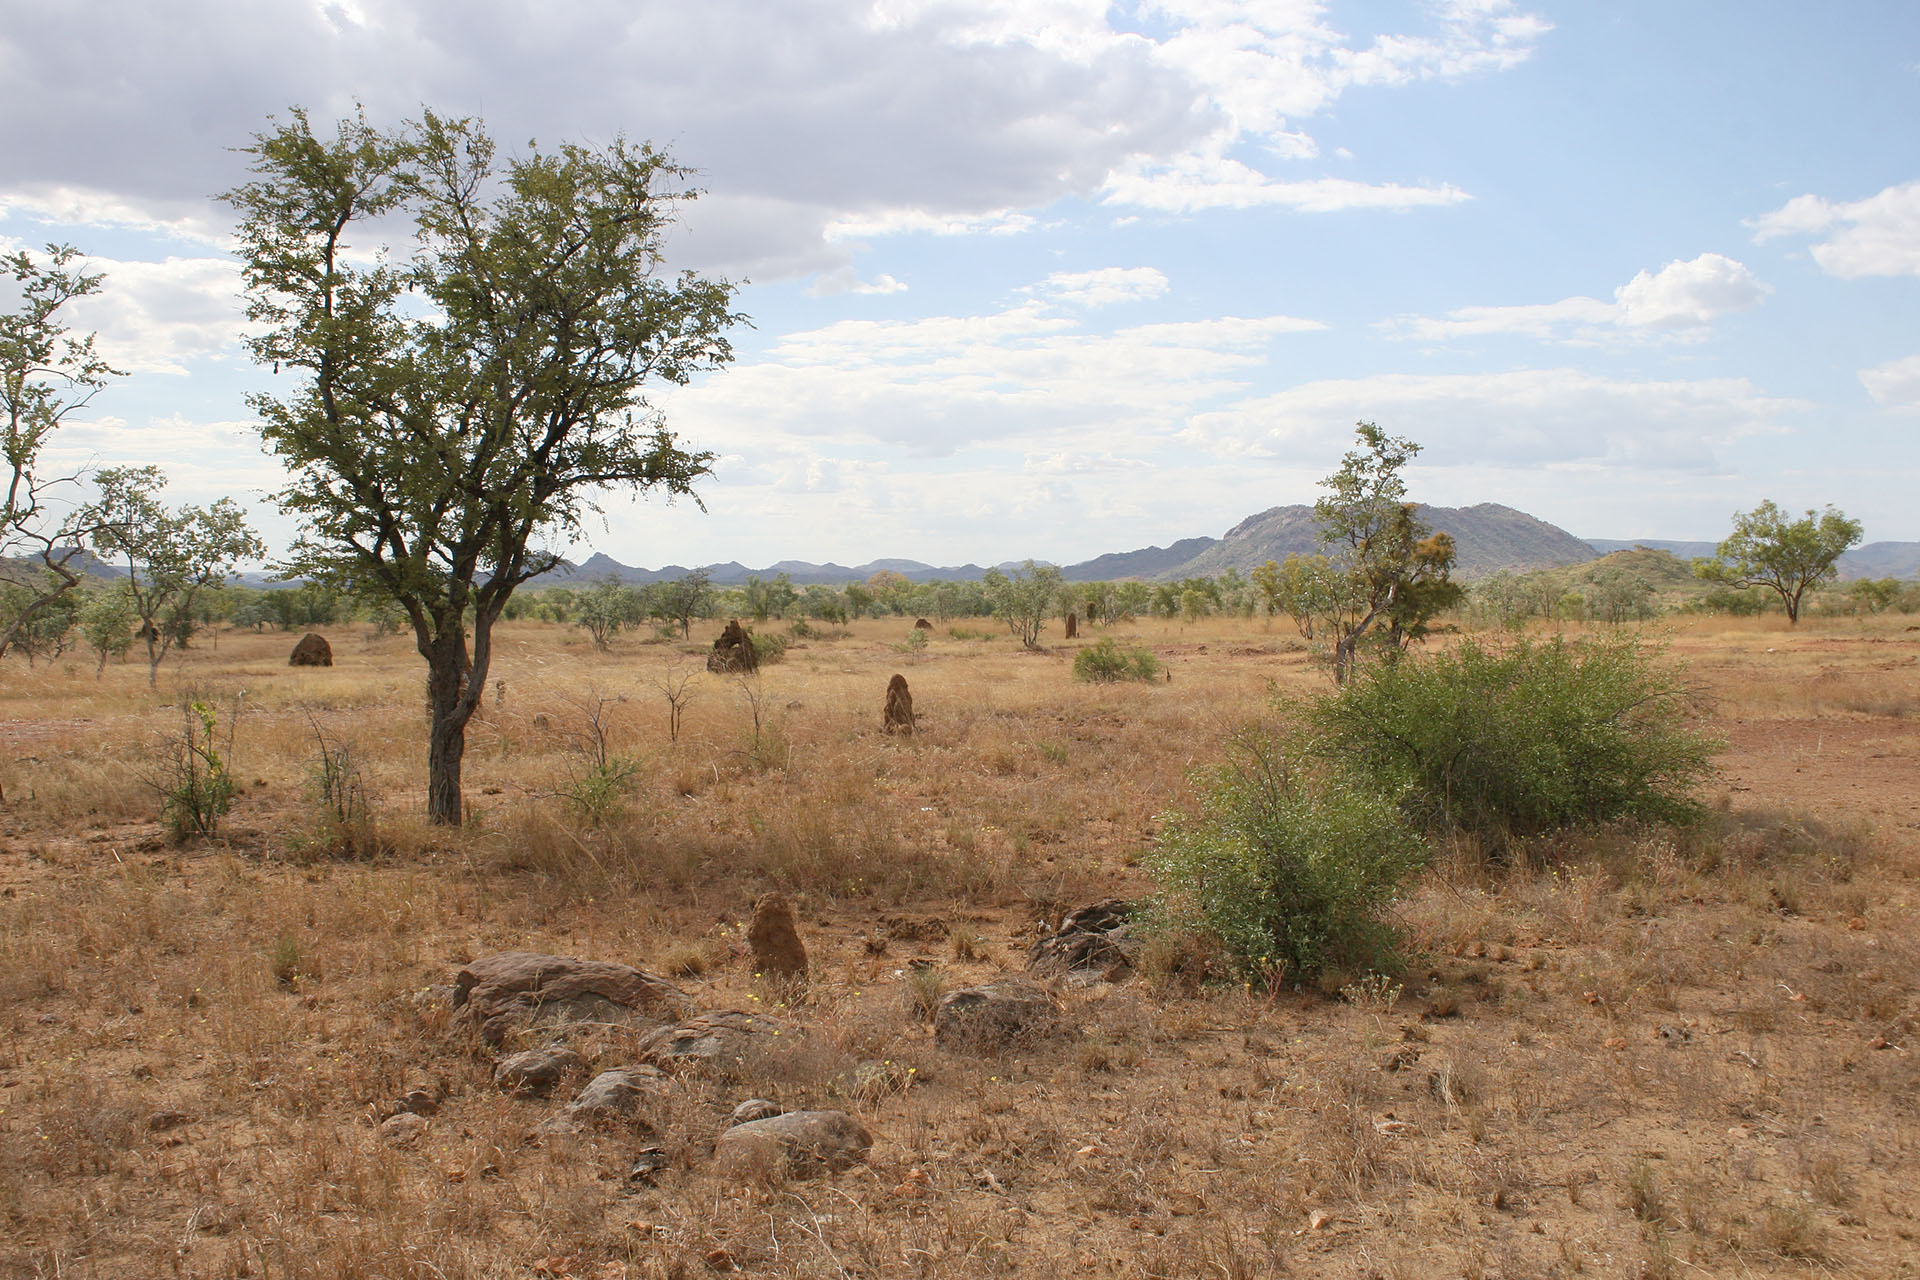 A typical Kimberley landscape.